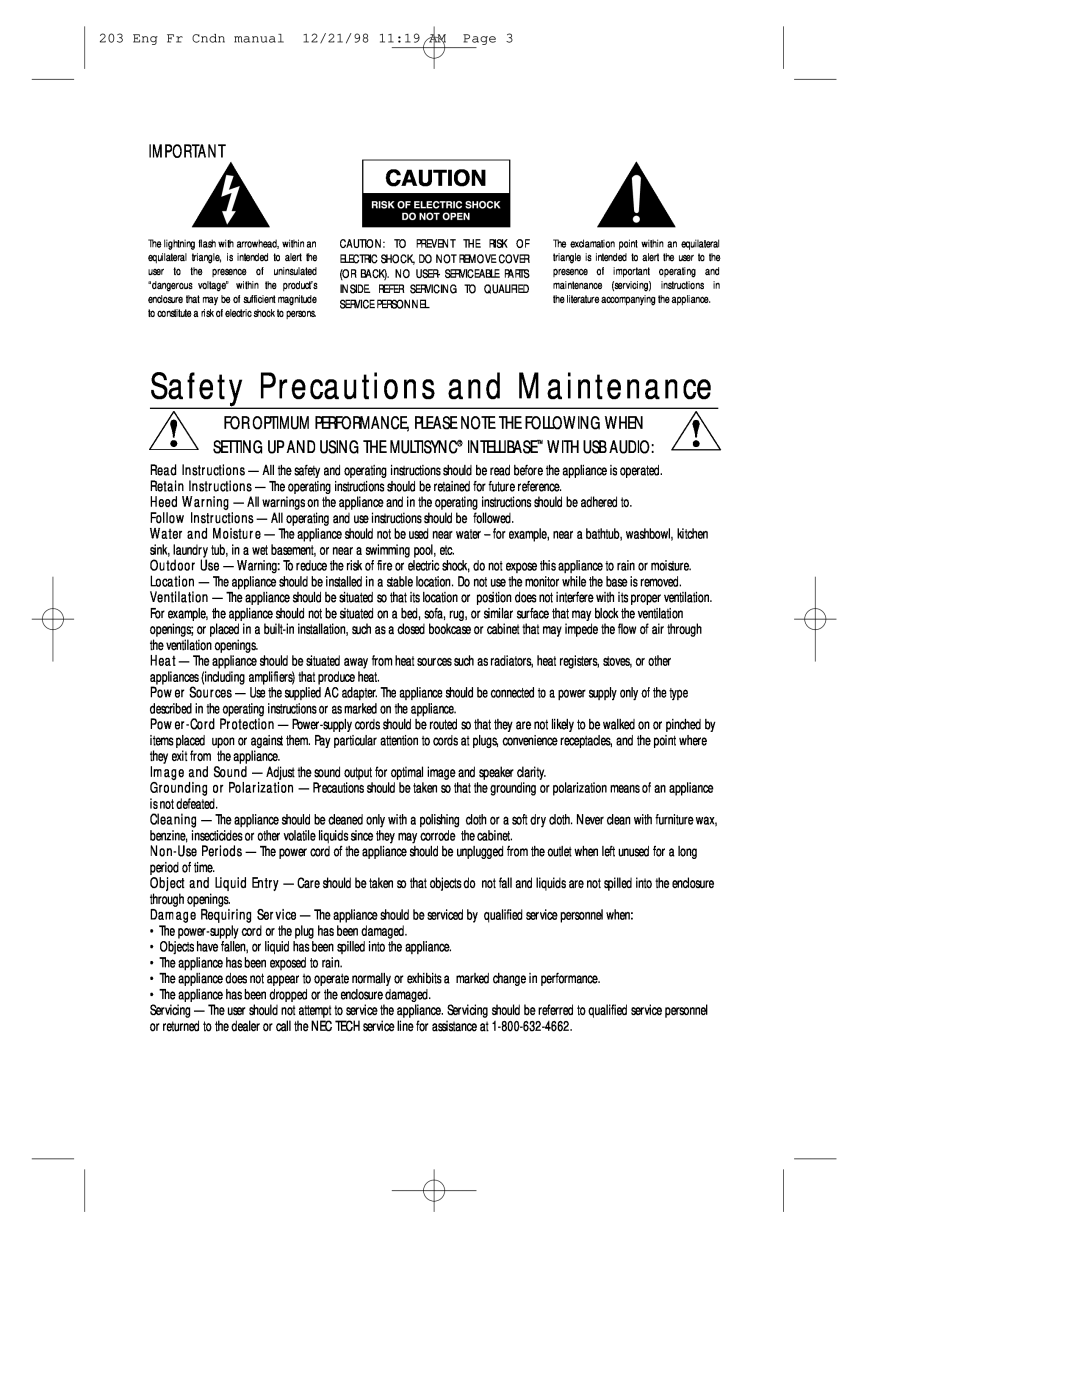 NEC USB user manual Safety Precautions and Maintenance 